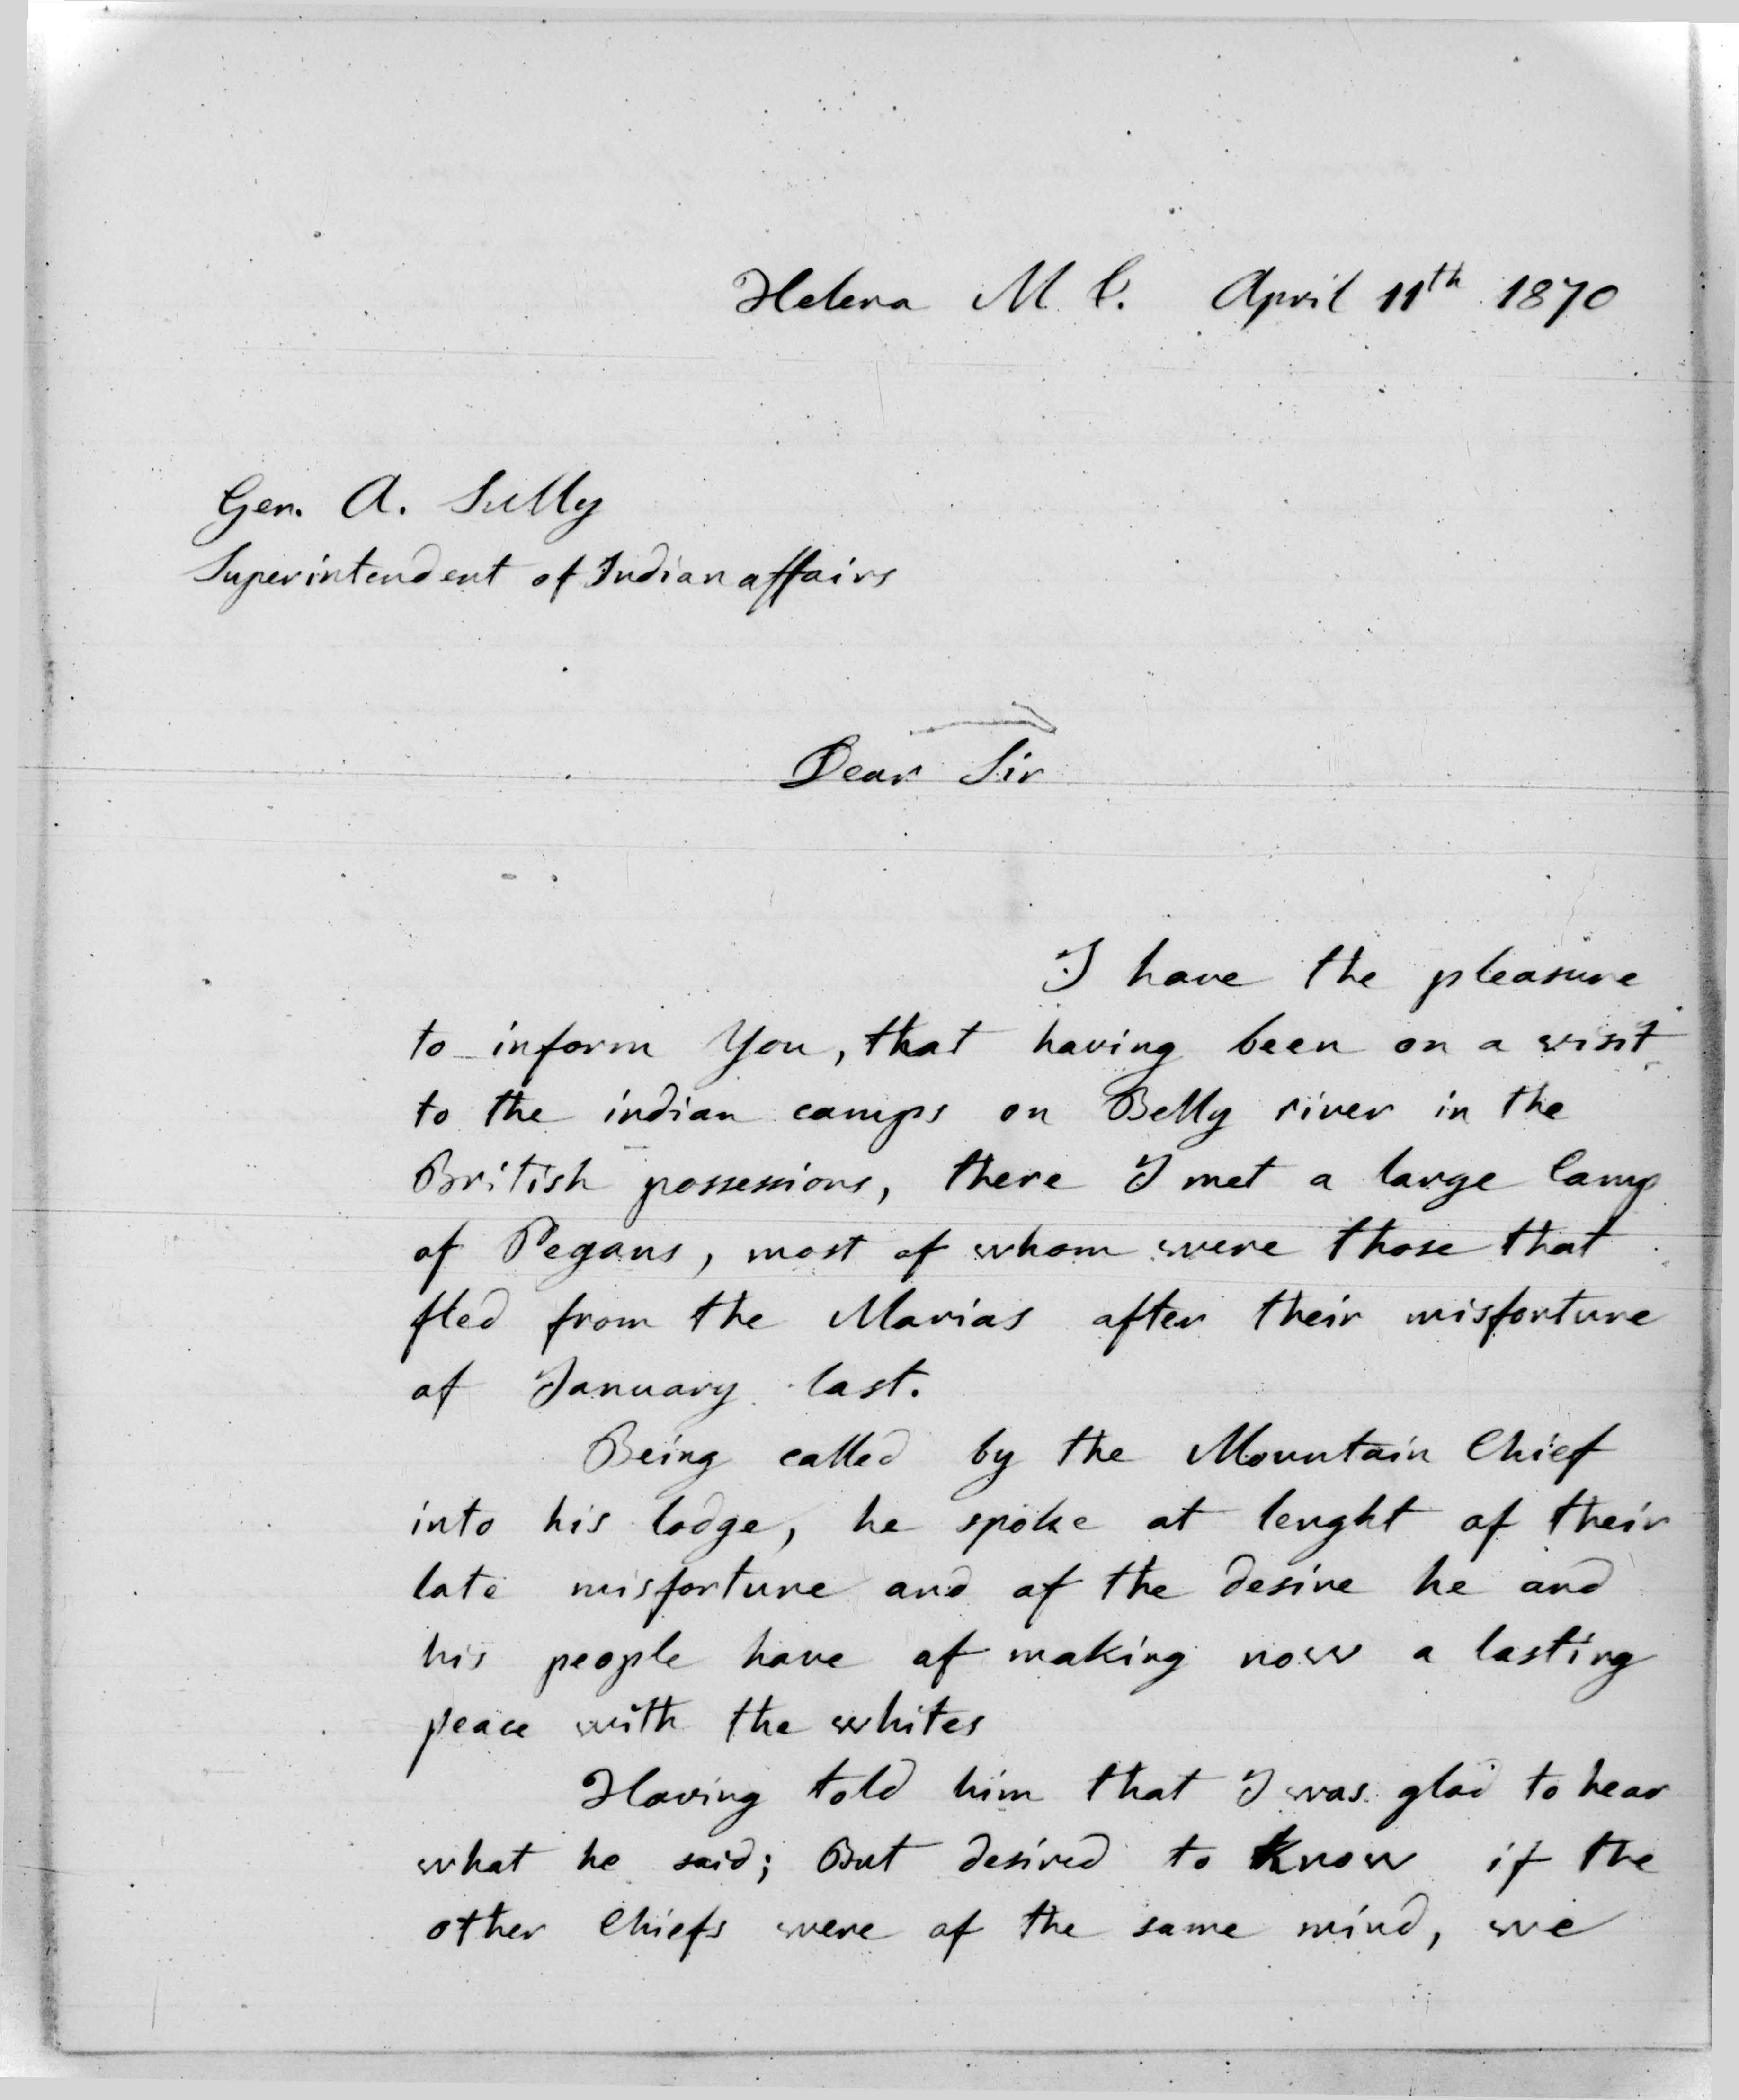 Letter from Camillus Imoda to Maj. Gen. Alfred Sully, April 11, 1870, p 1-3.